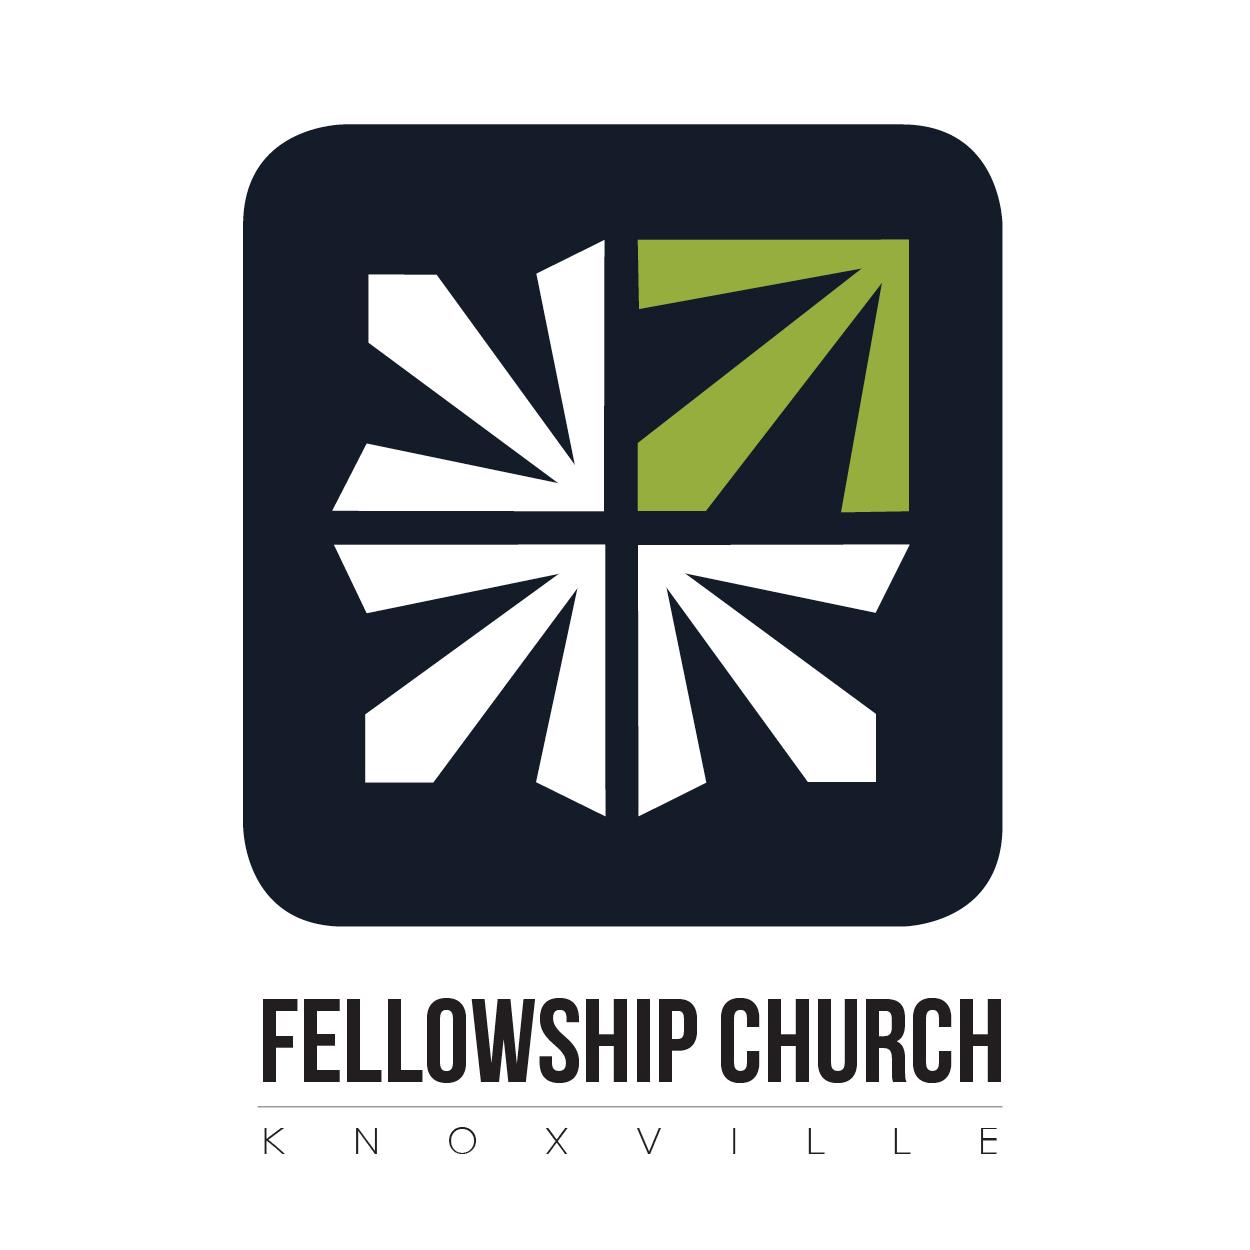 Knoxville Logo - Fellowship Church Knoxville Logo - Knoxville Habitat for Humanity